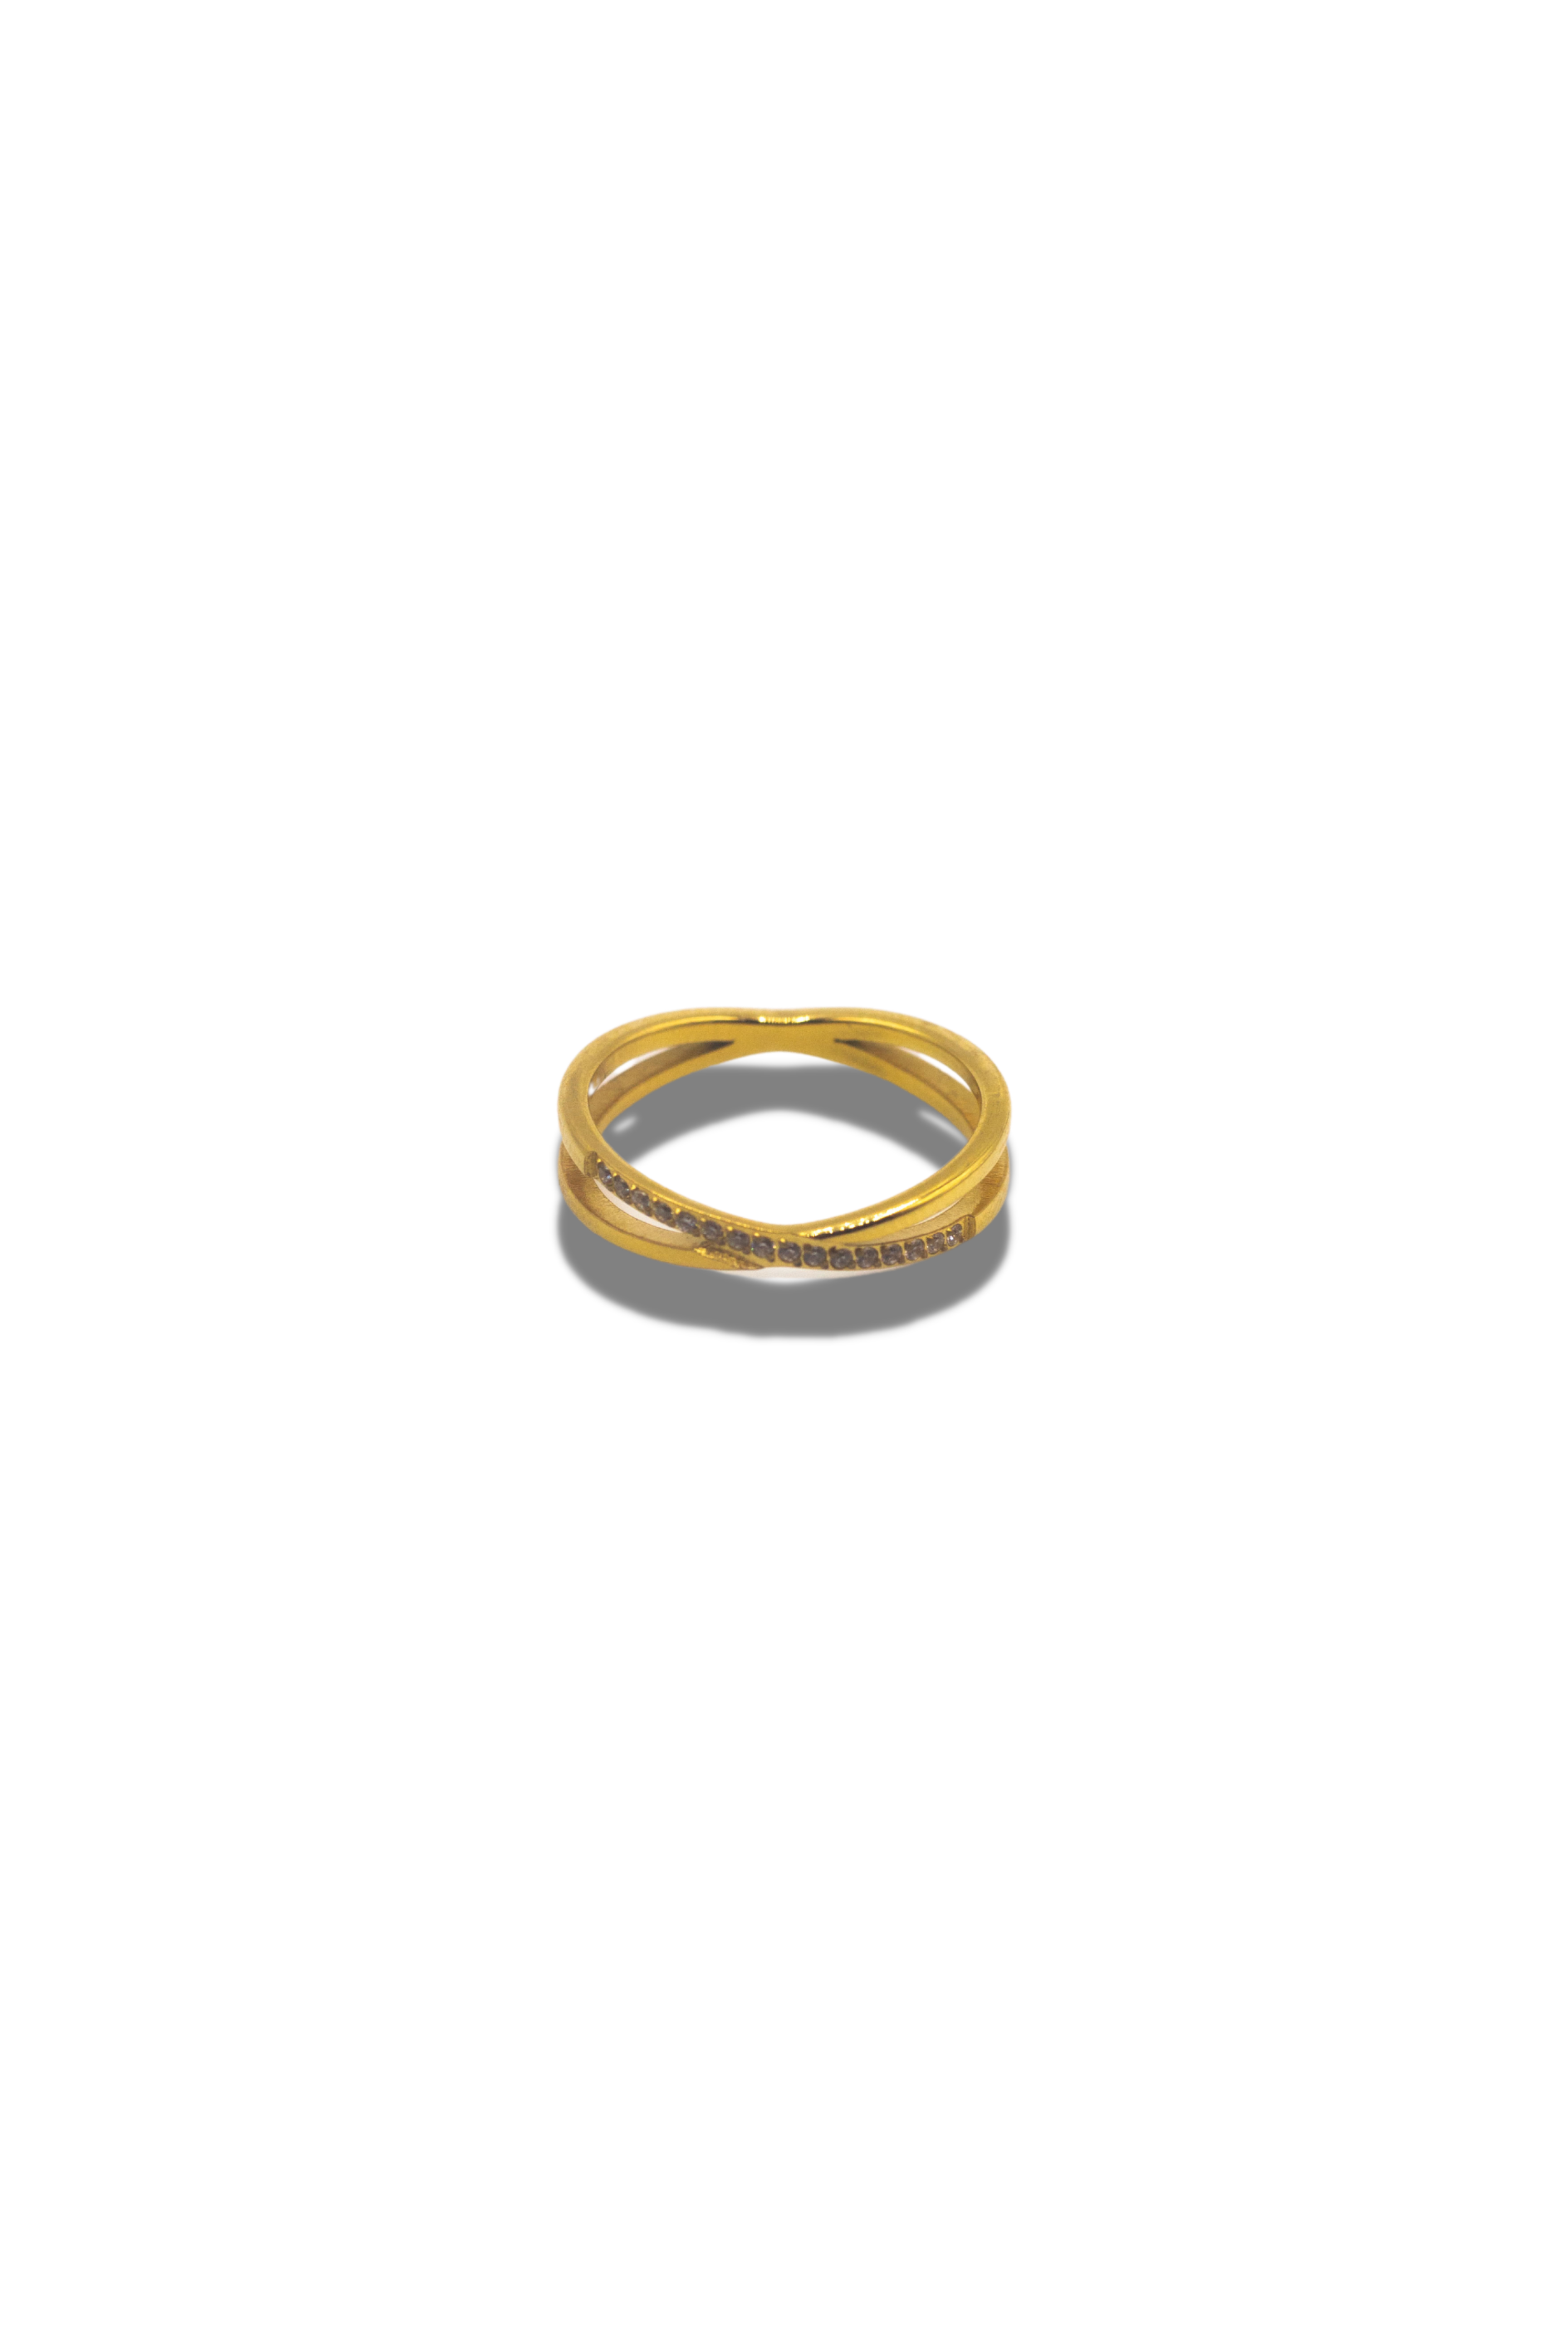 18k gold stainless steel ring. Criss Cross Cubic Zirconia Ring by E's Element.